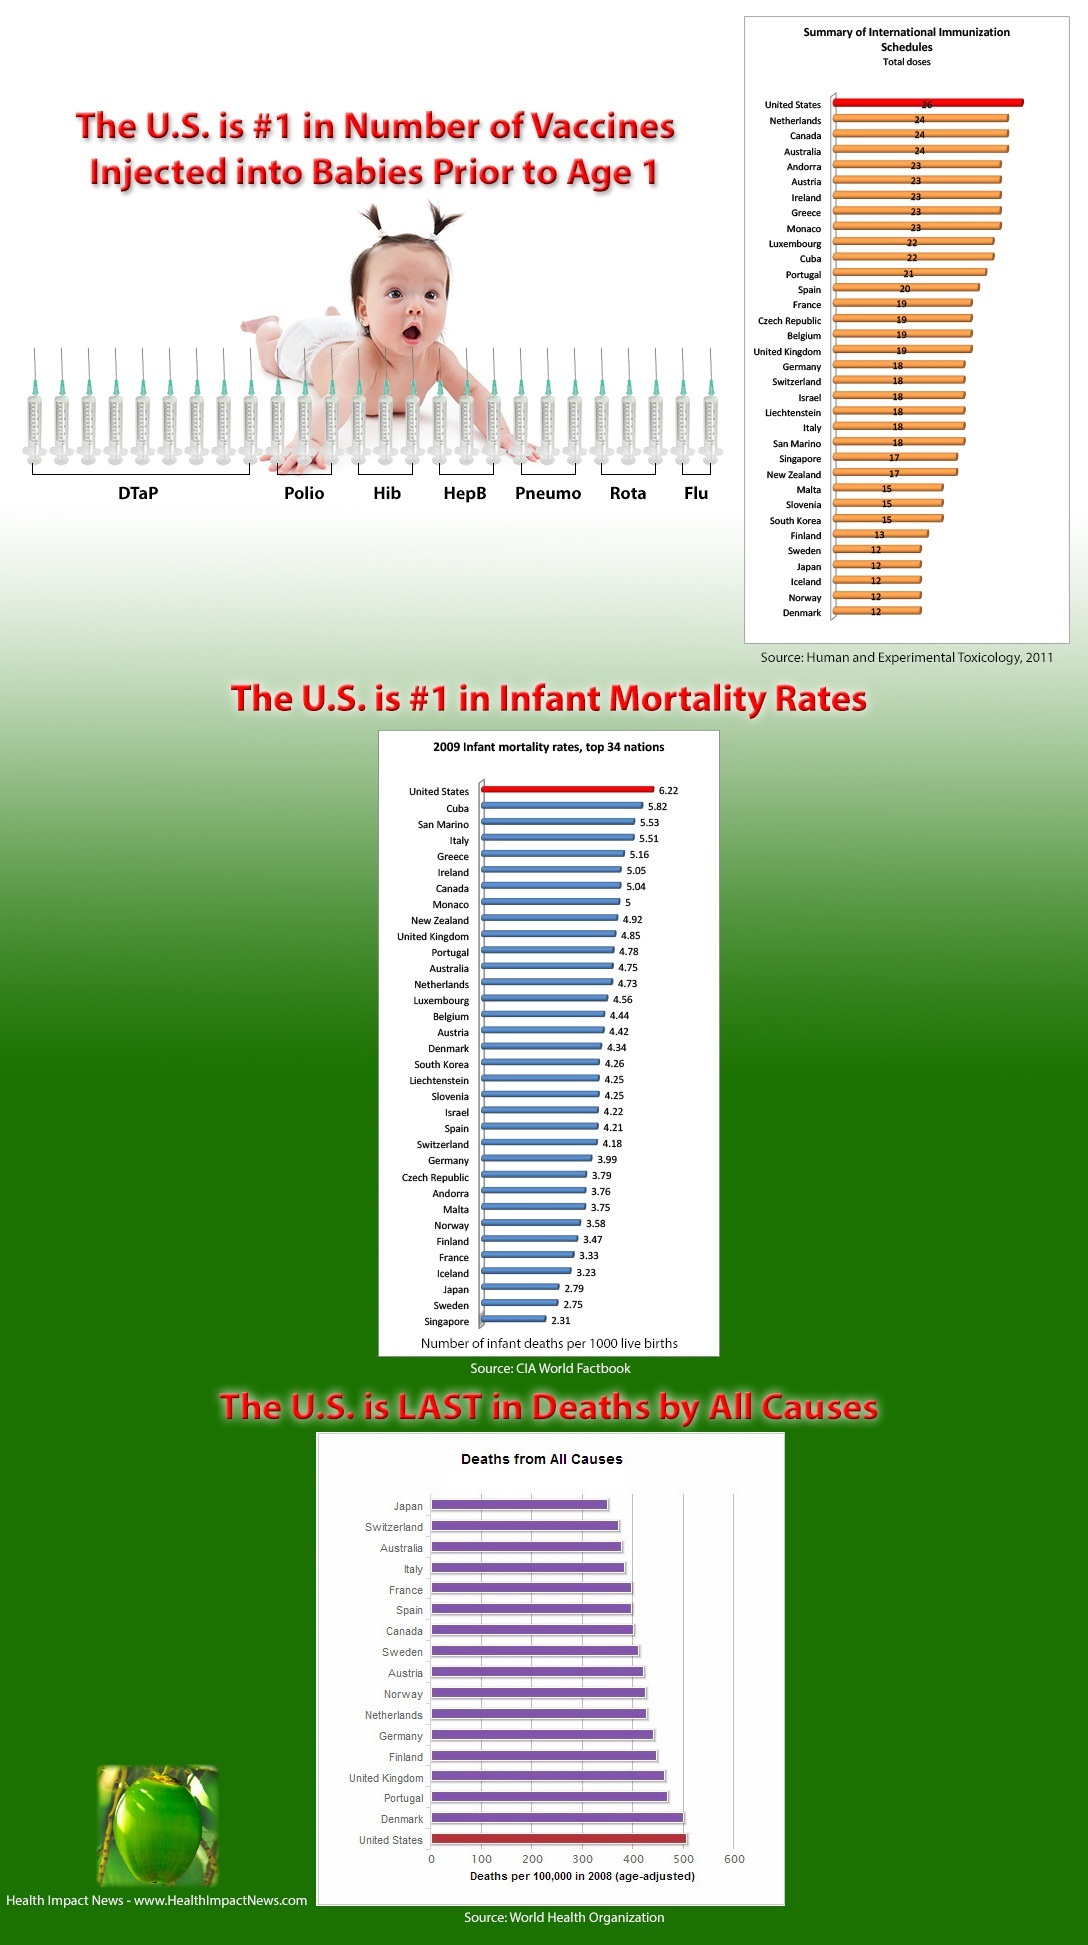 Mississippi First in Infant Vaccination Rates & Highest Infant 